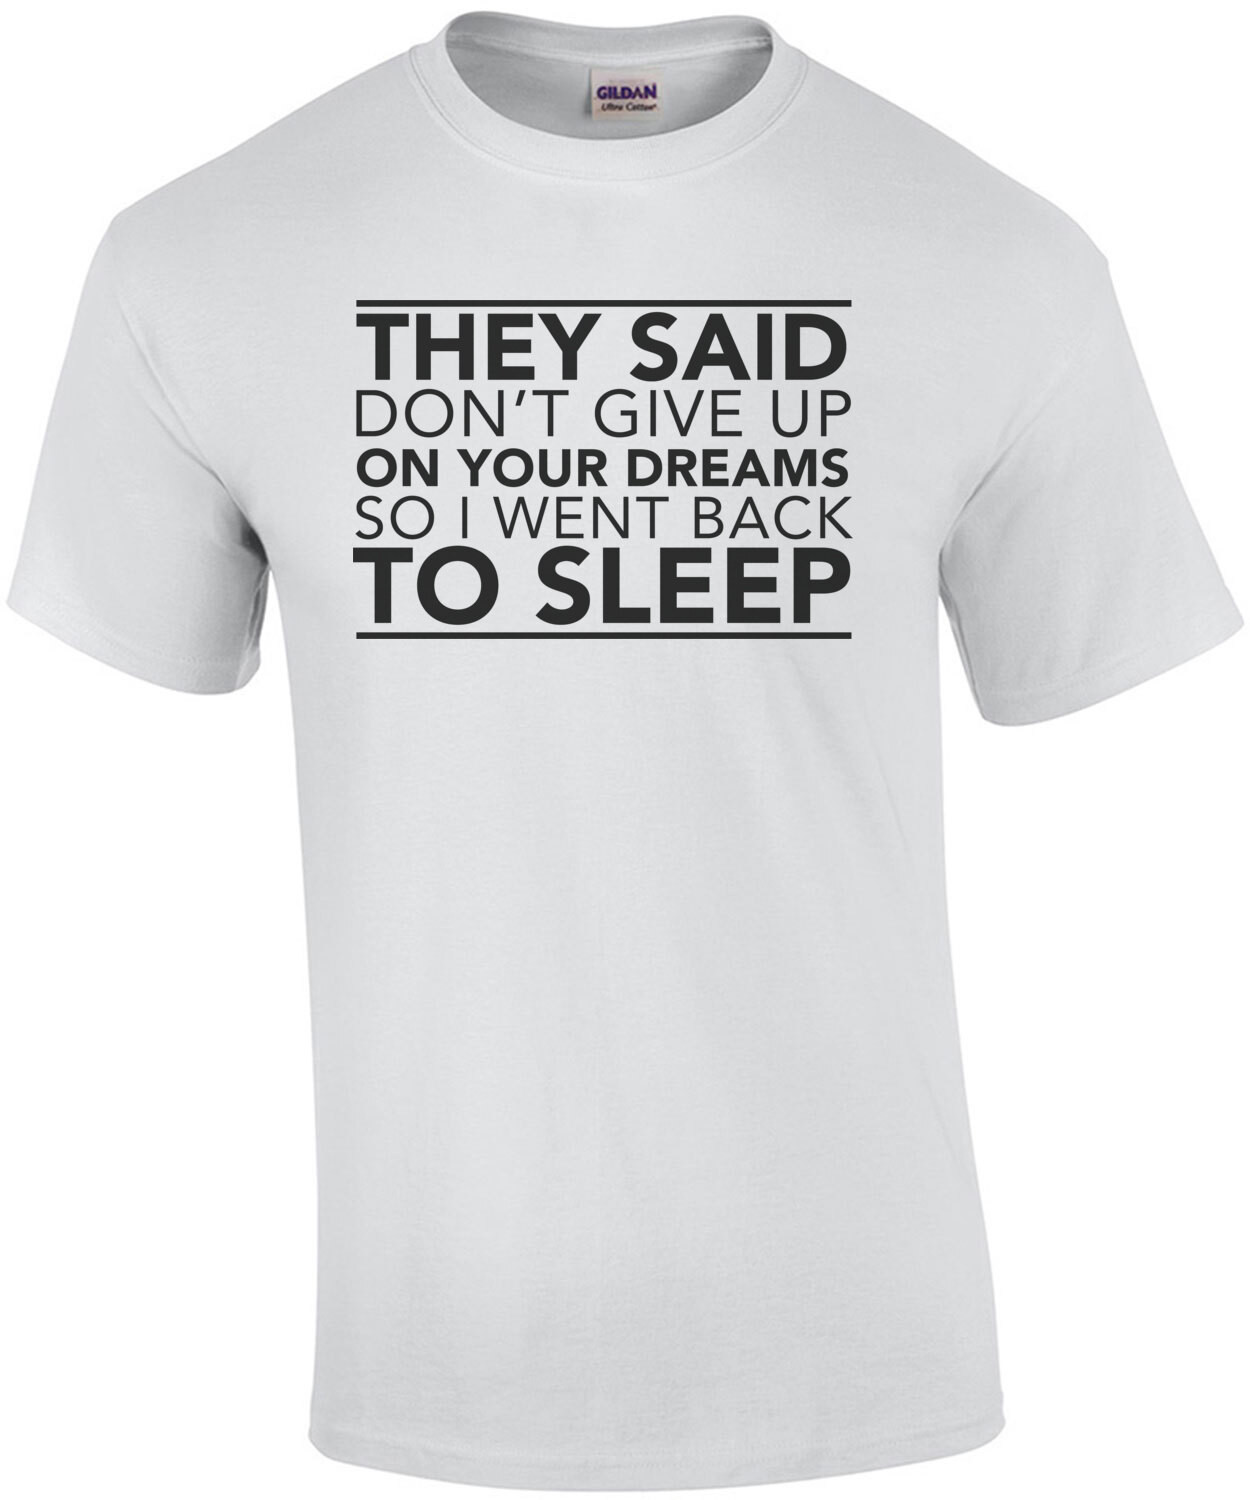 They said don't give up your dreams so I went back to sleep. funny t-shirt